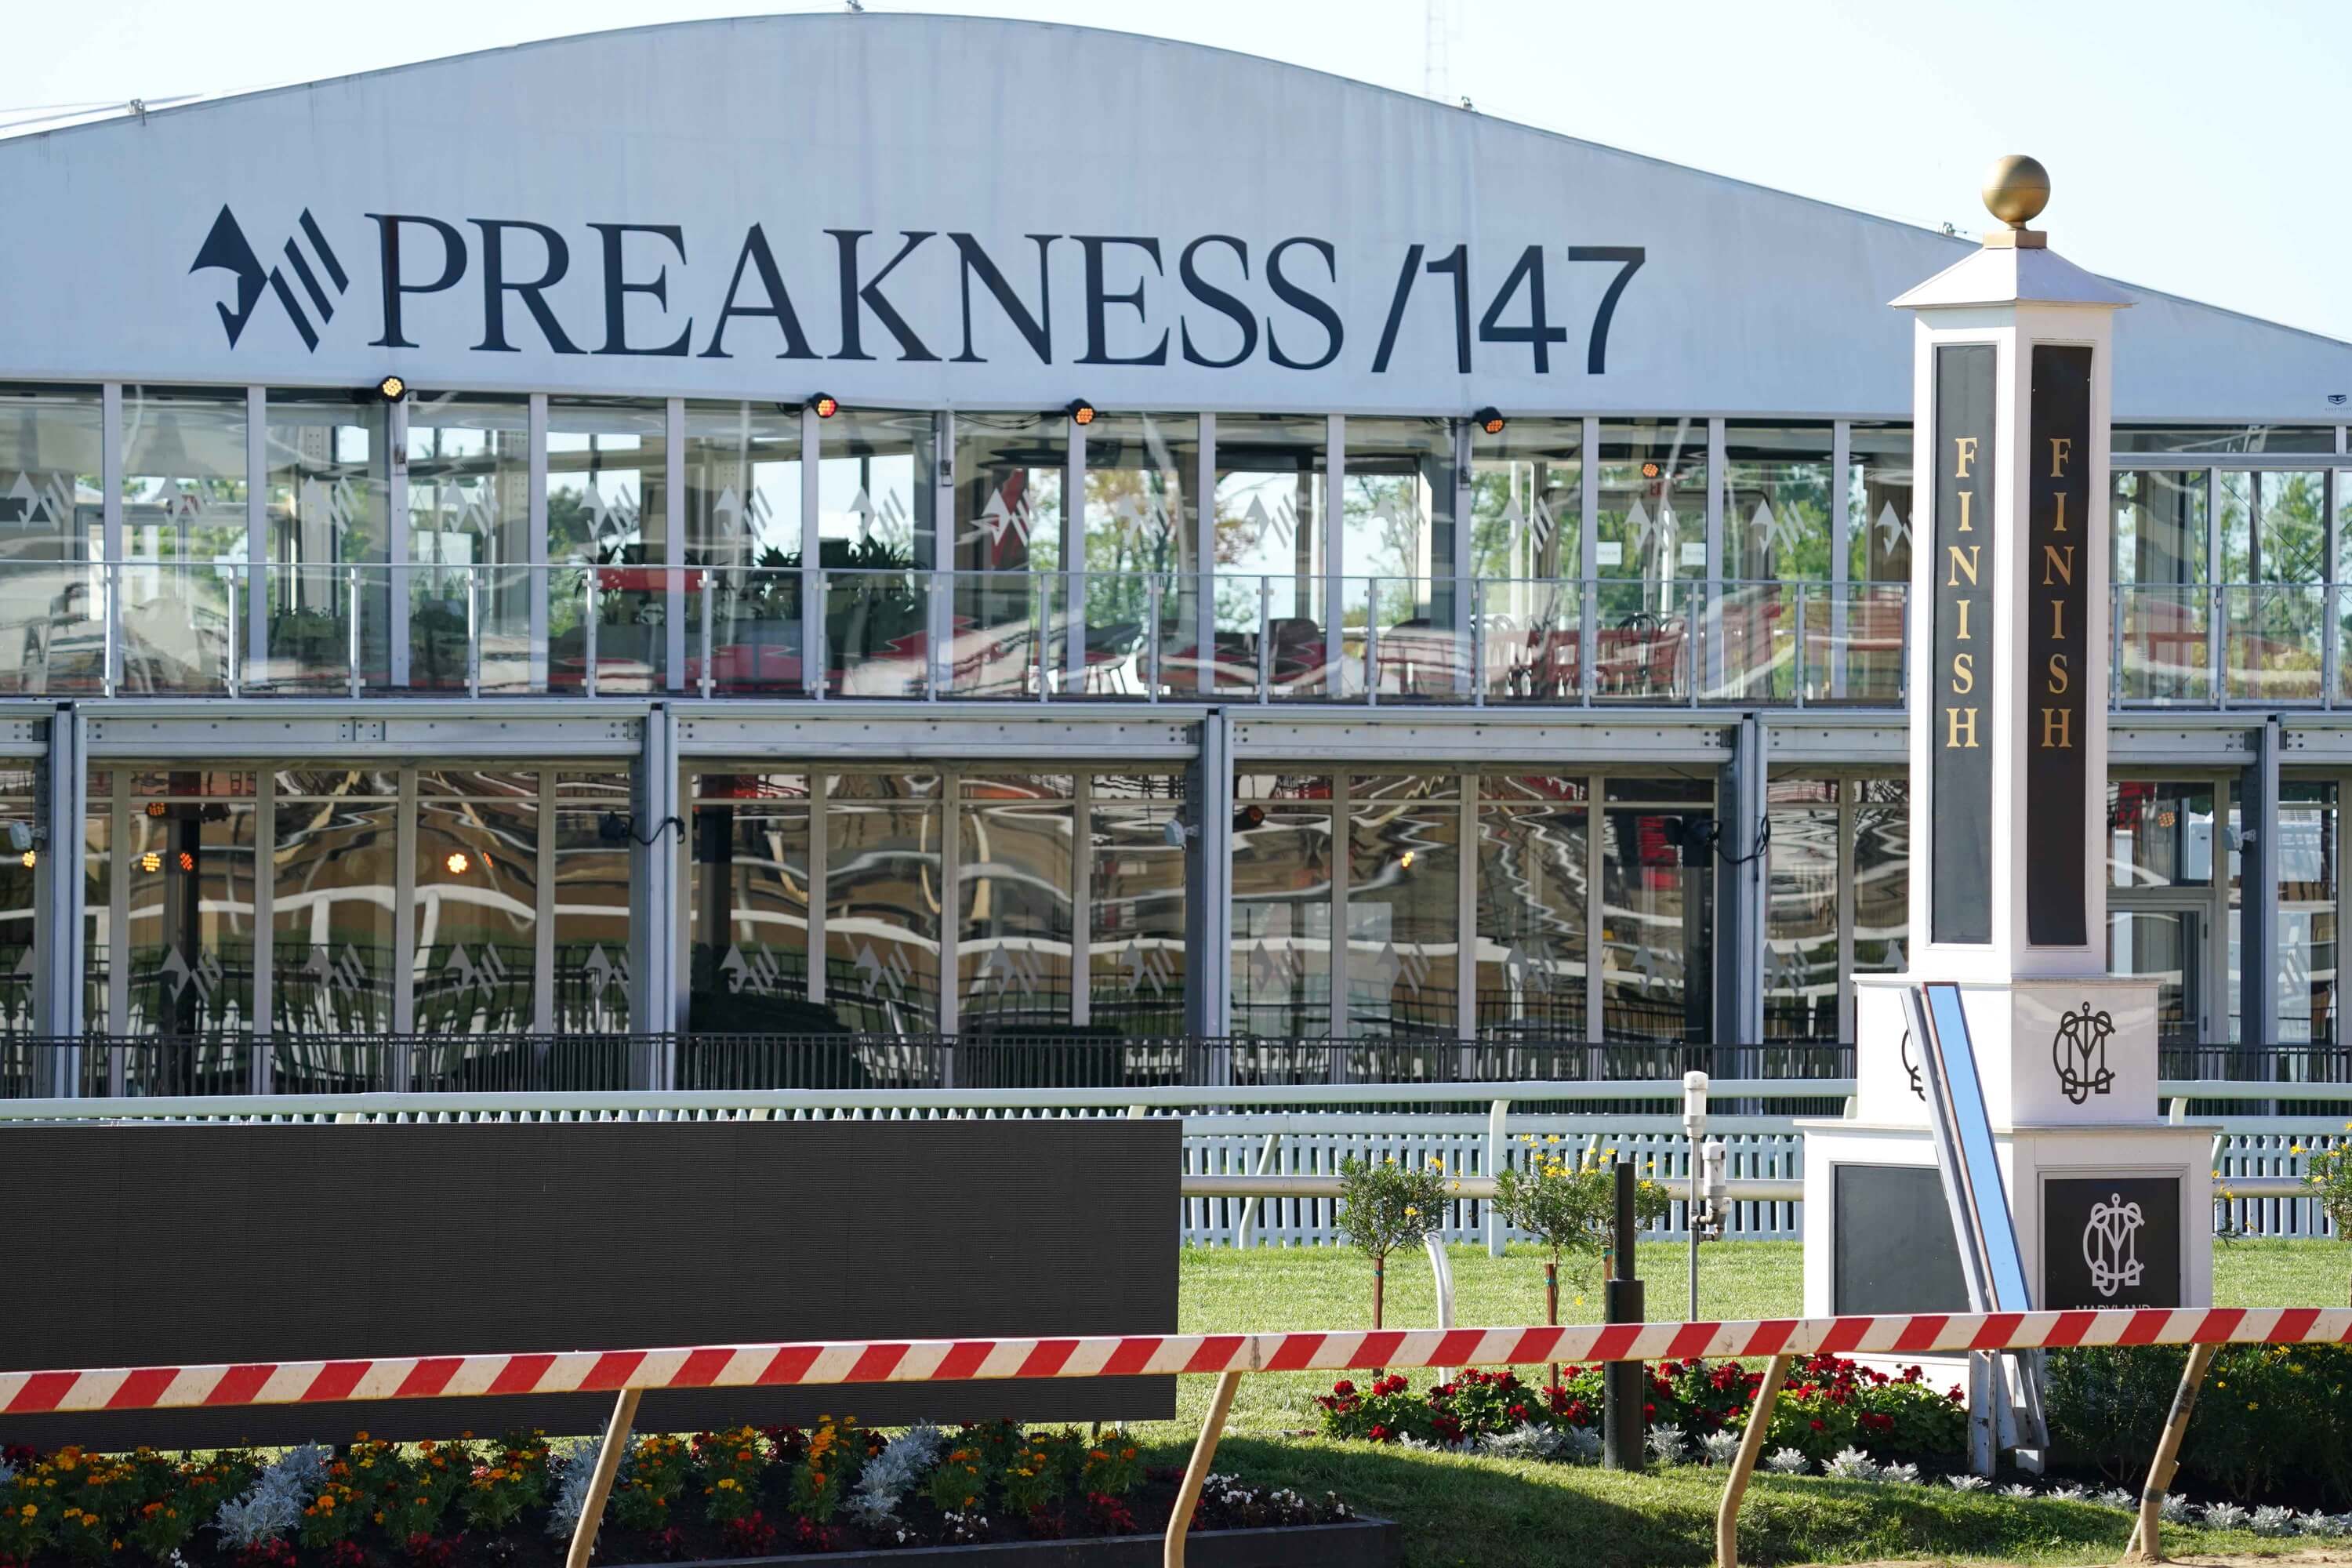 How To Bet - Pimlico Late Pick 5 on Preakness Day